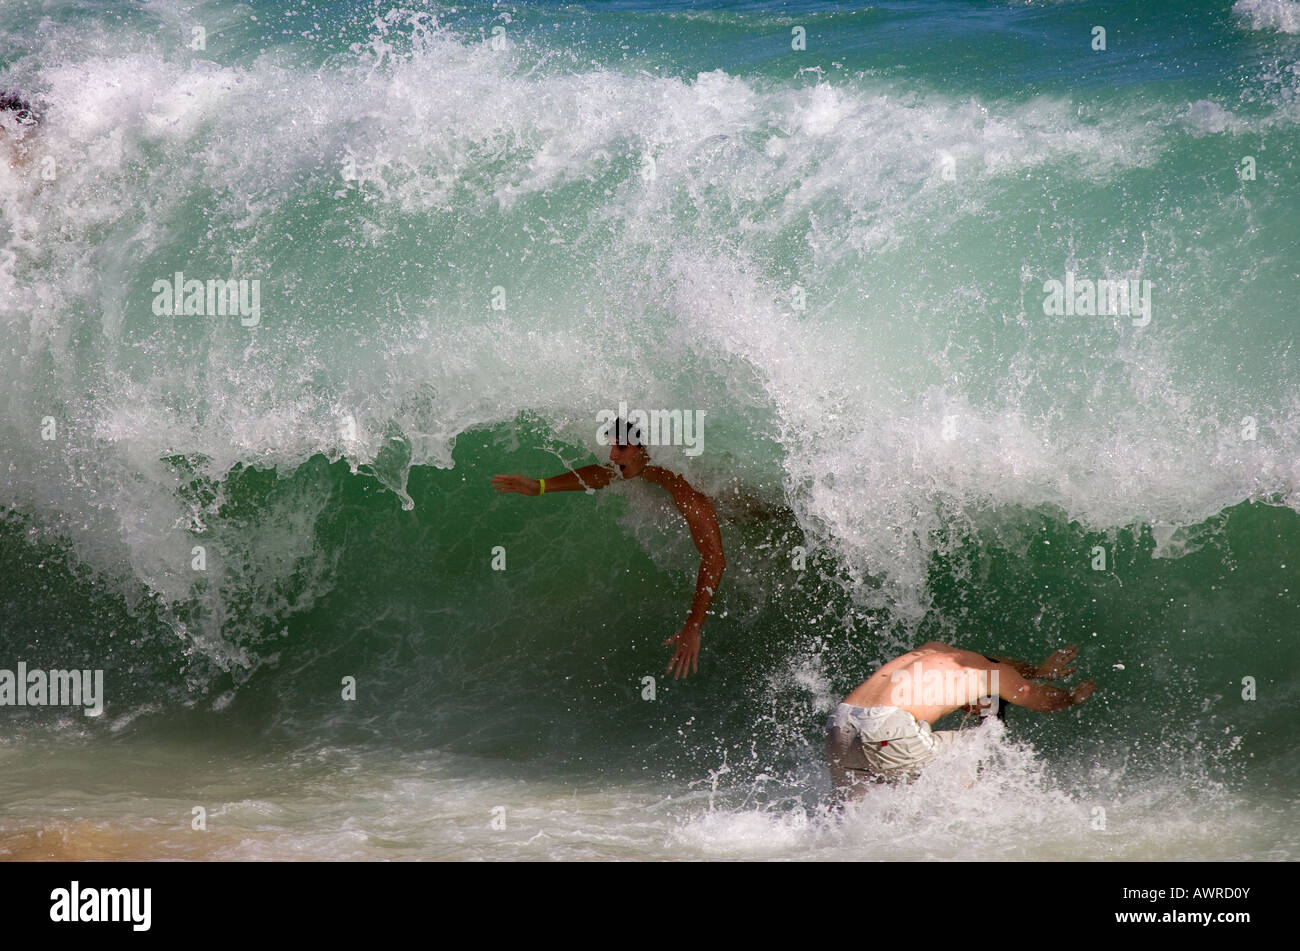 Swimmers Being Wiped Out by Large Wave Stock Photo